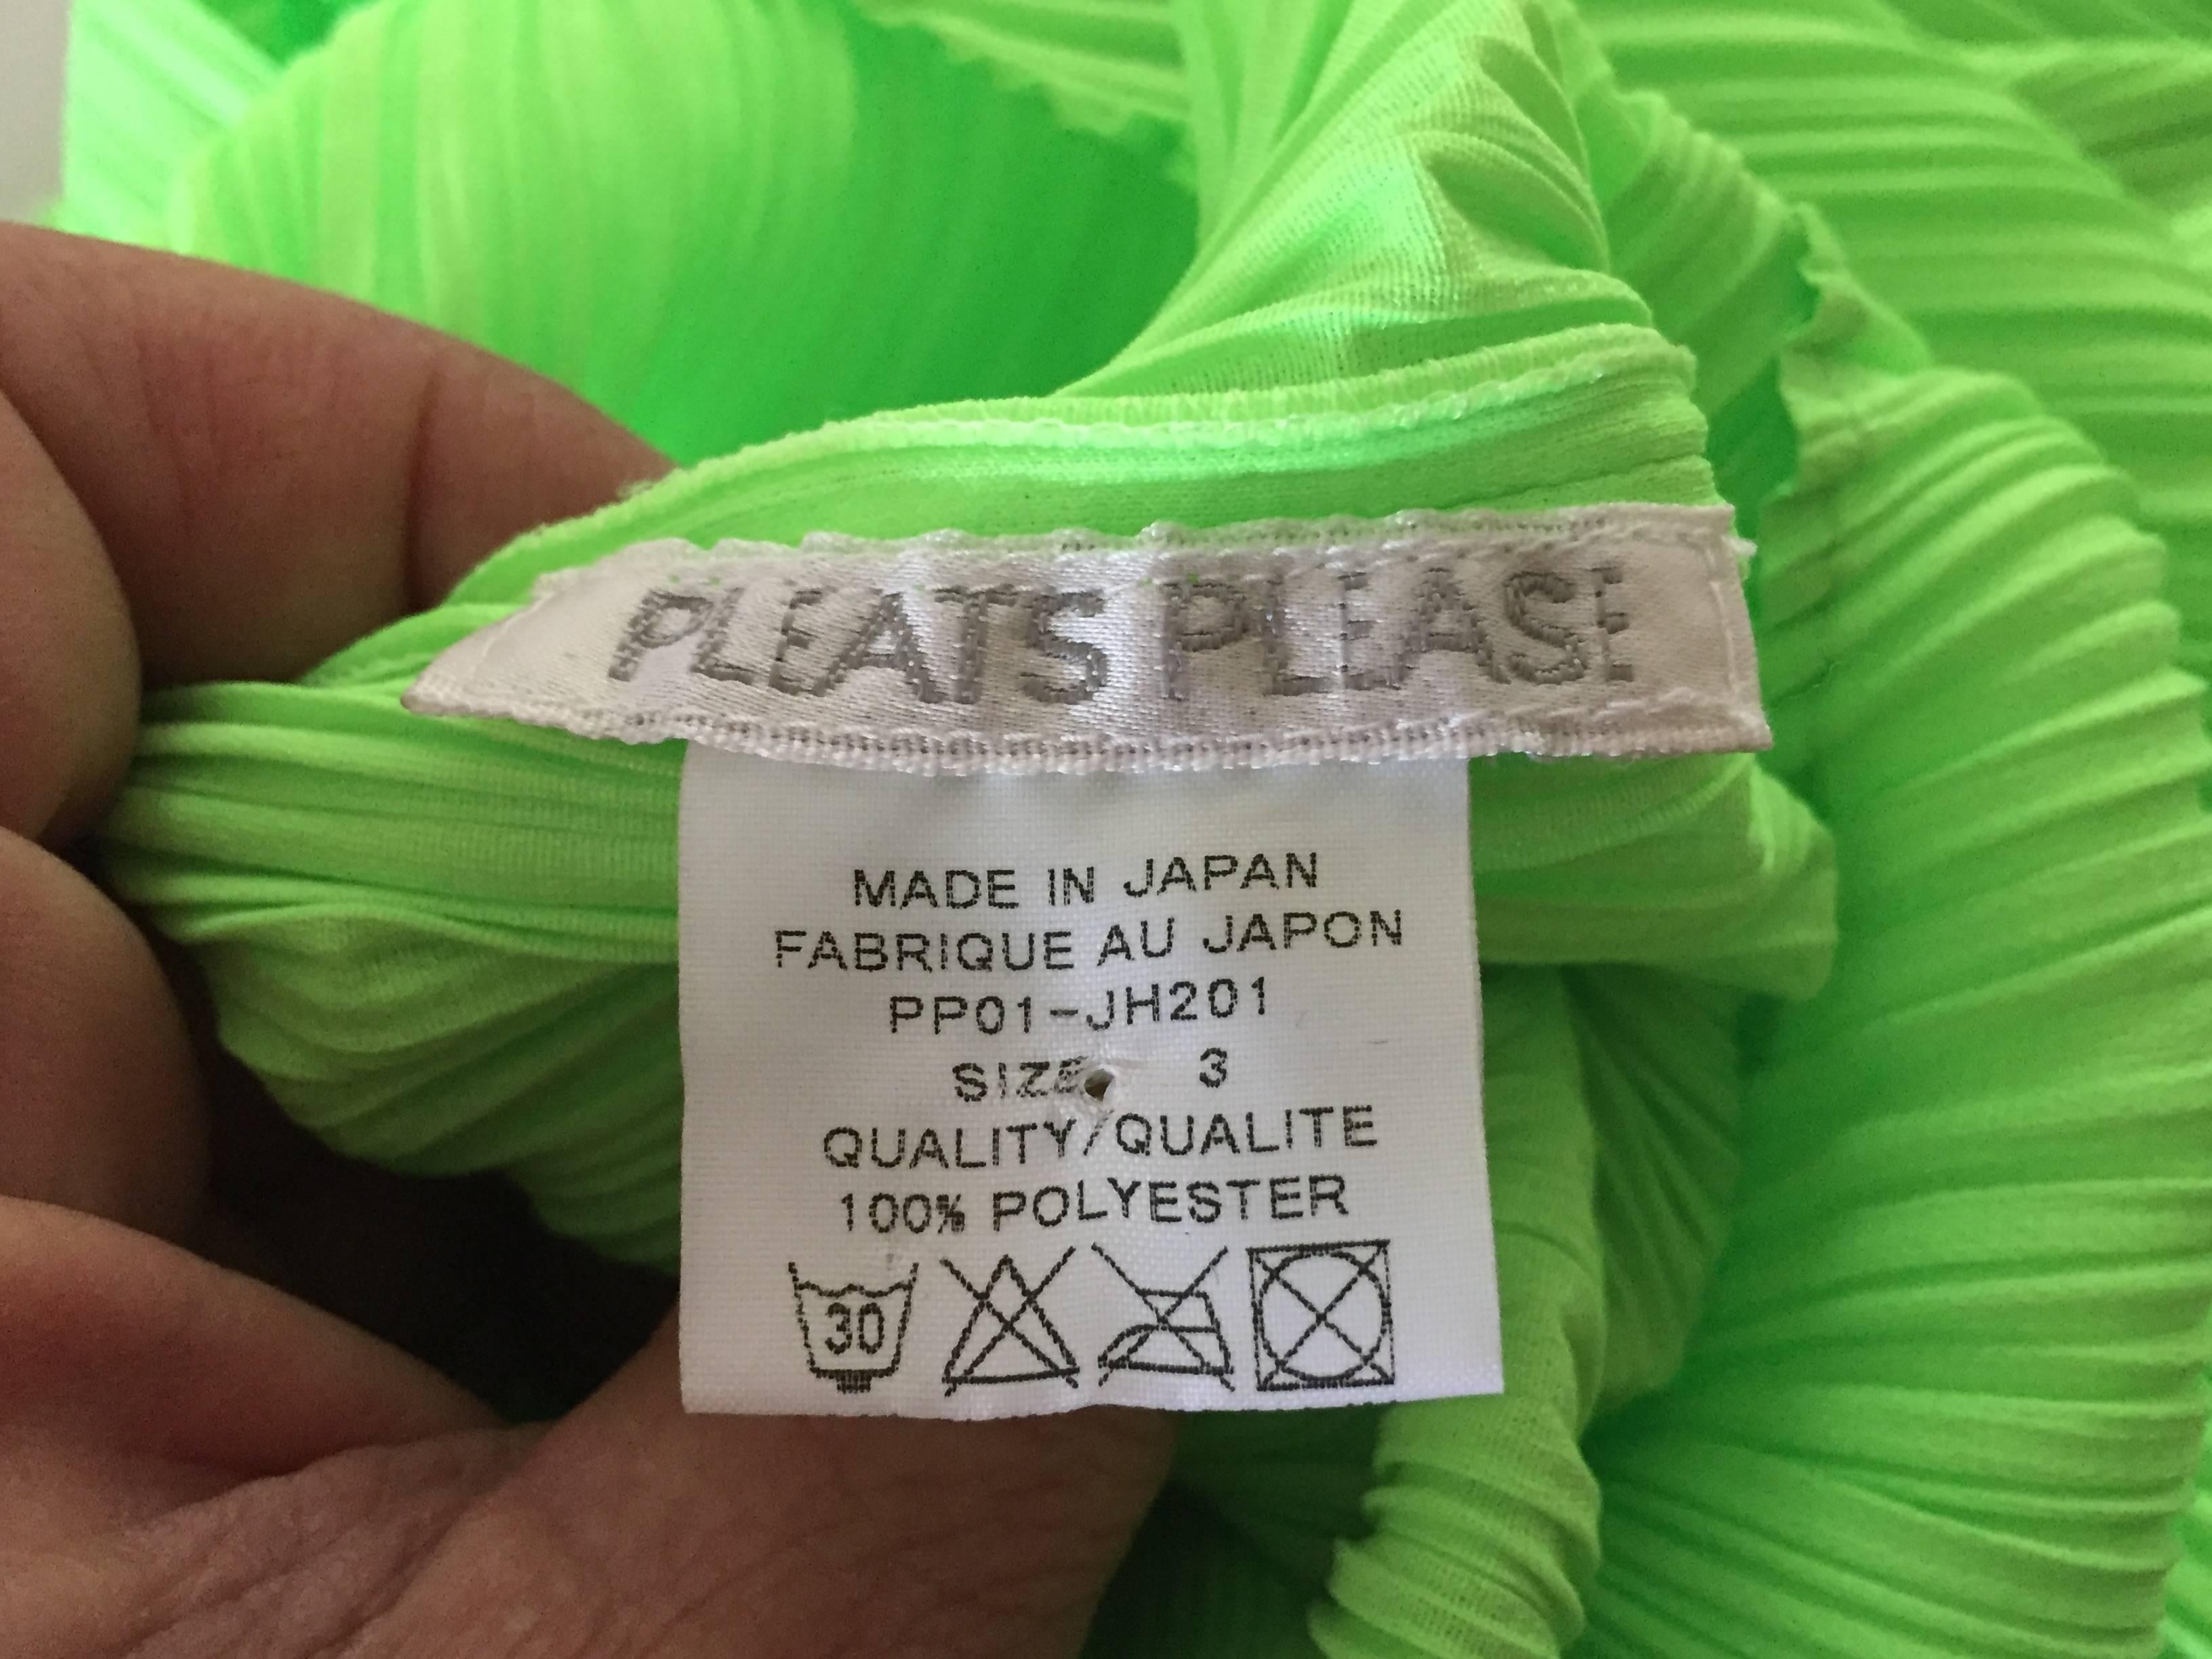 Issey Miyake Neon Green Long Dress for Pleats Please In Excellent Condition For Sale In Cloverdale, CA